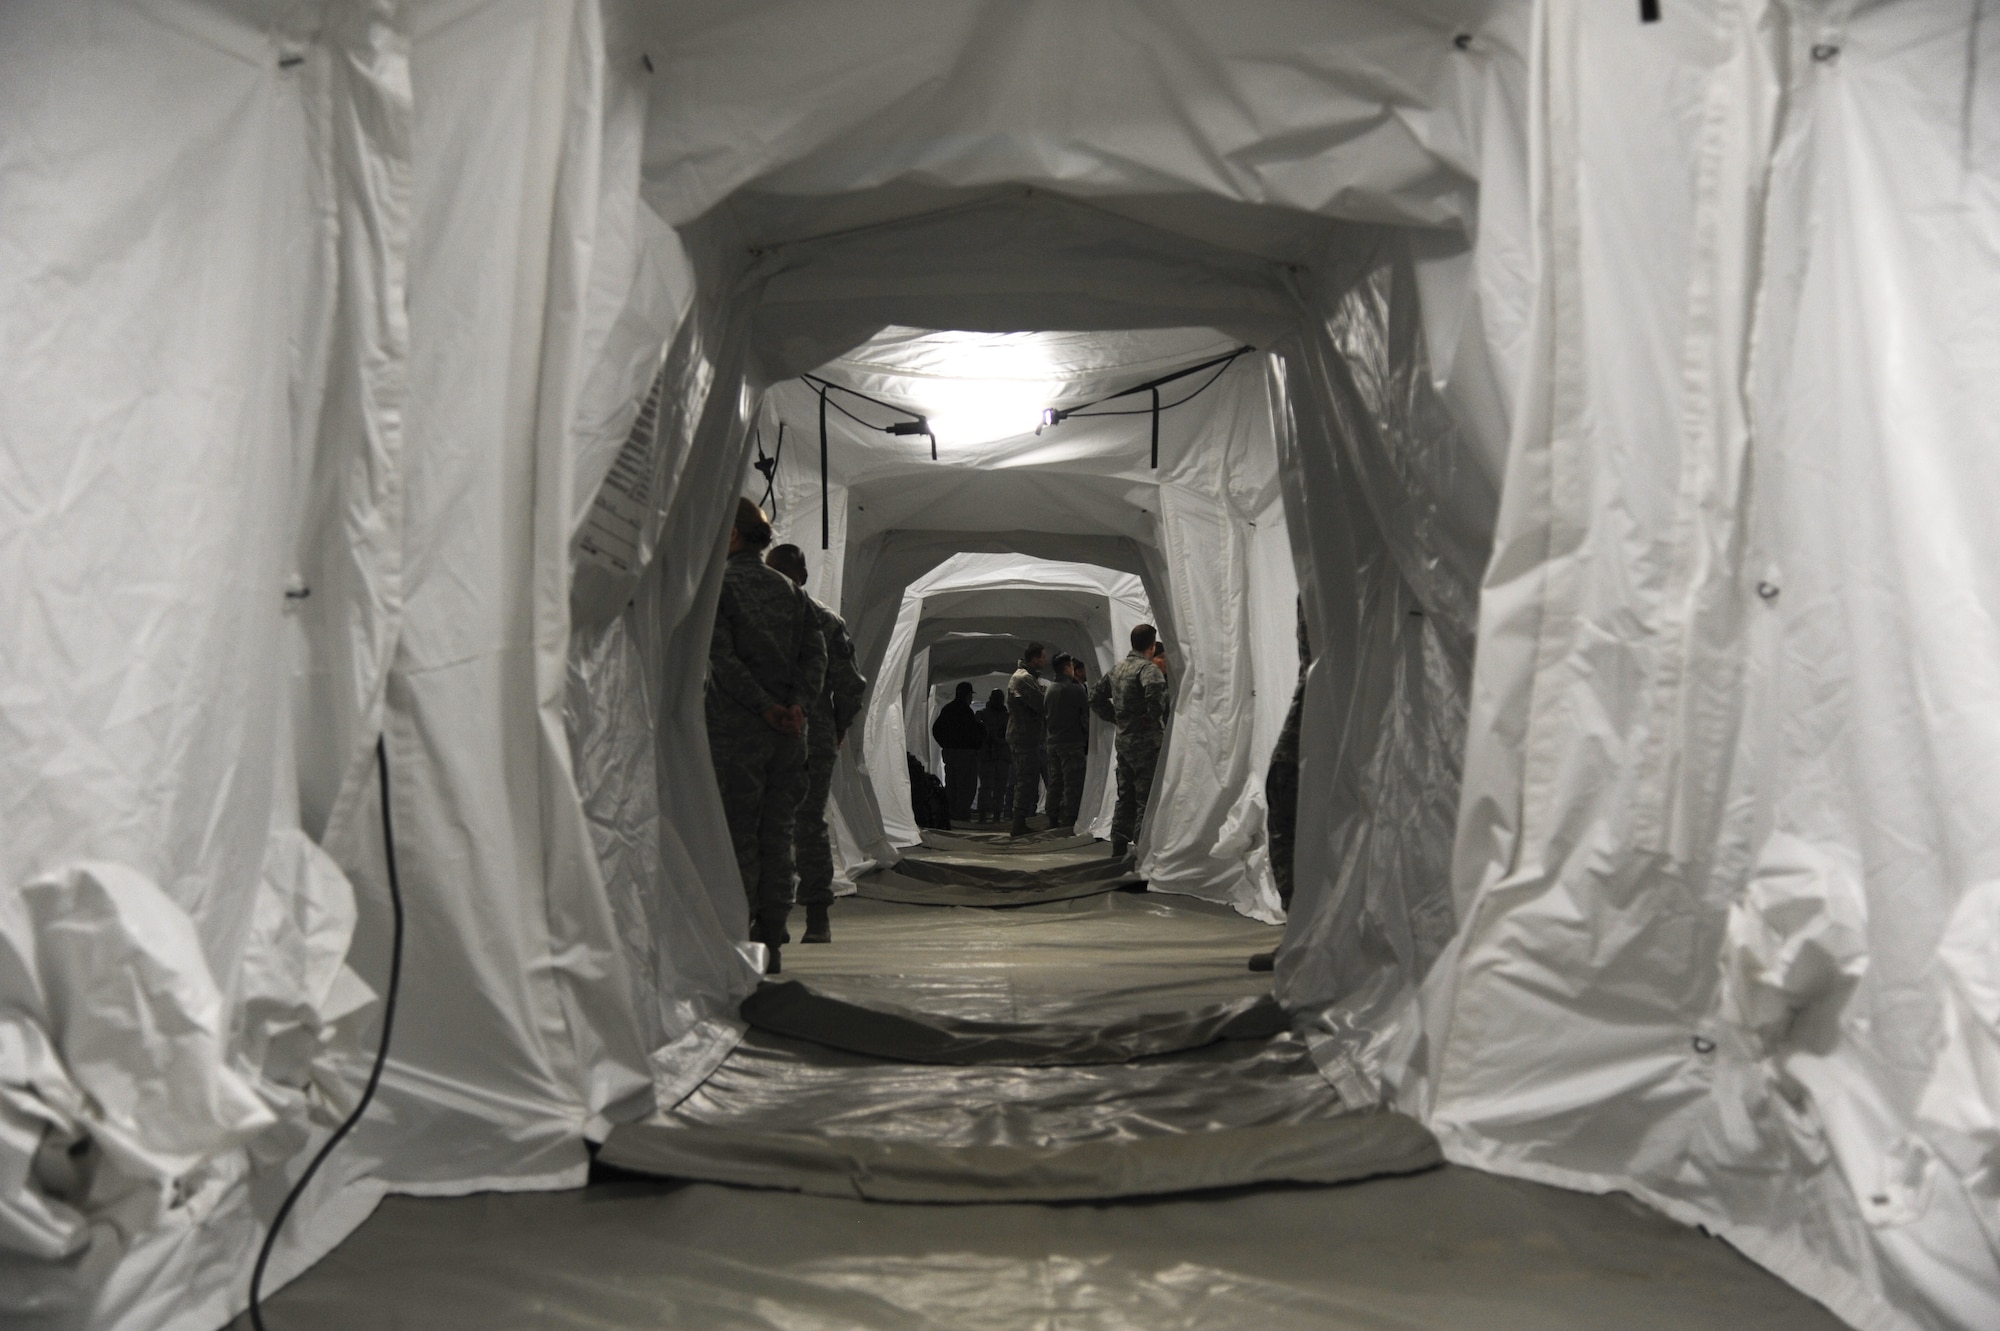 The main corridor of the new tent system for the Expeditionary Medical Support System 15 February, 2014. The new tent structure contains collective protection materials to protect against chemical, biological, radiological and nuclear attacks. The materials are incorporated into the outer skin of the structure, making it easier for the overall set up. (U.S. Air Force photo by Staff Sgt. Steve Stanley/Released)